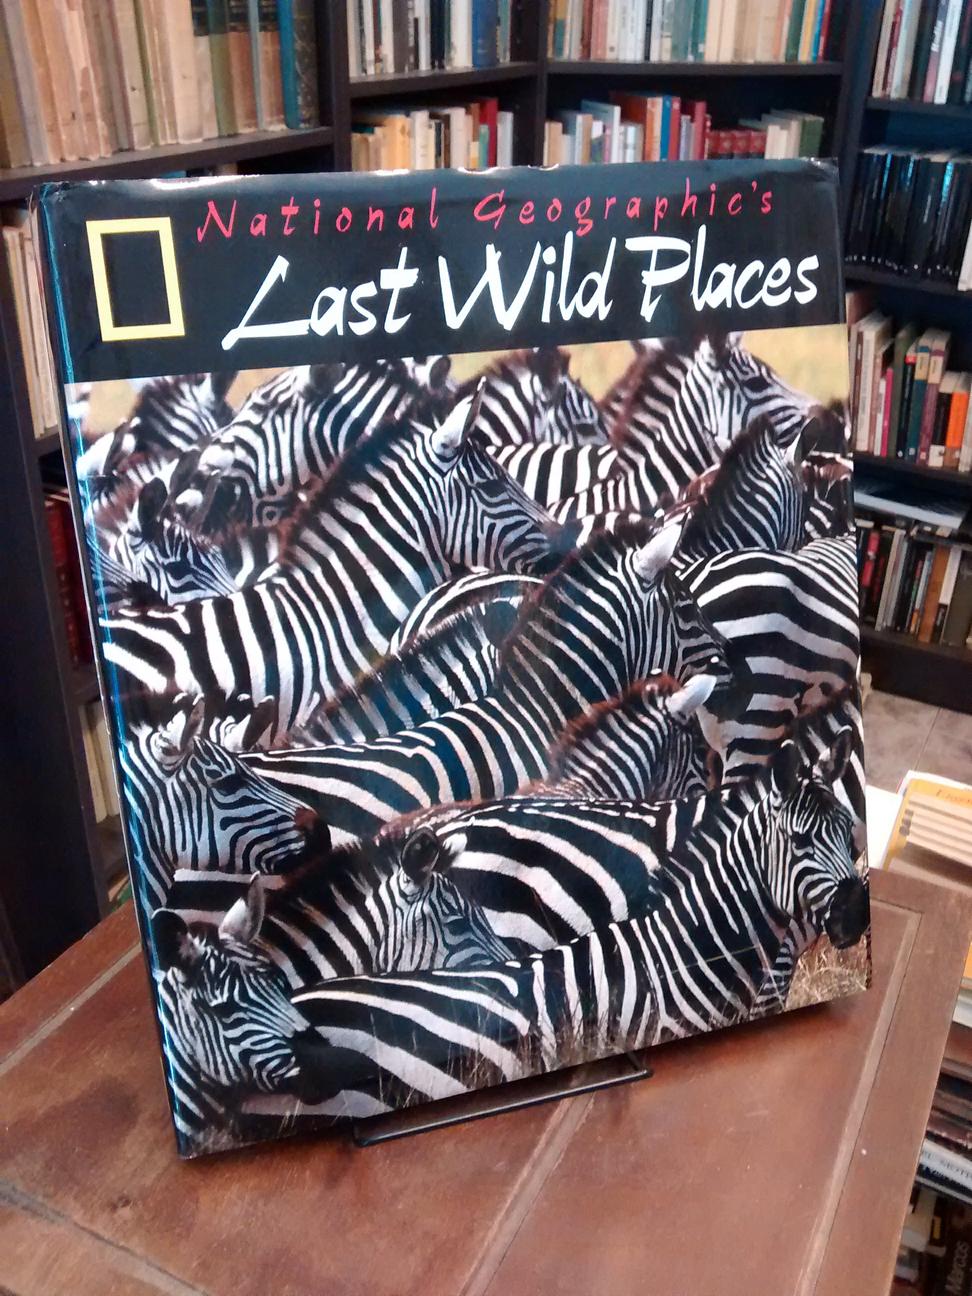 National Geographic's Last Wild Places - 